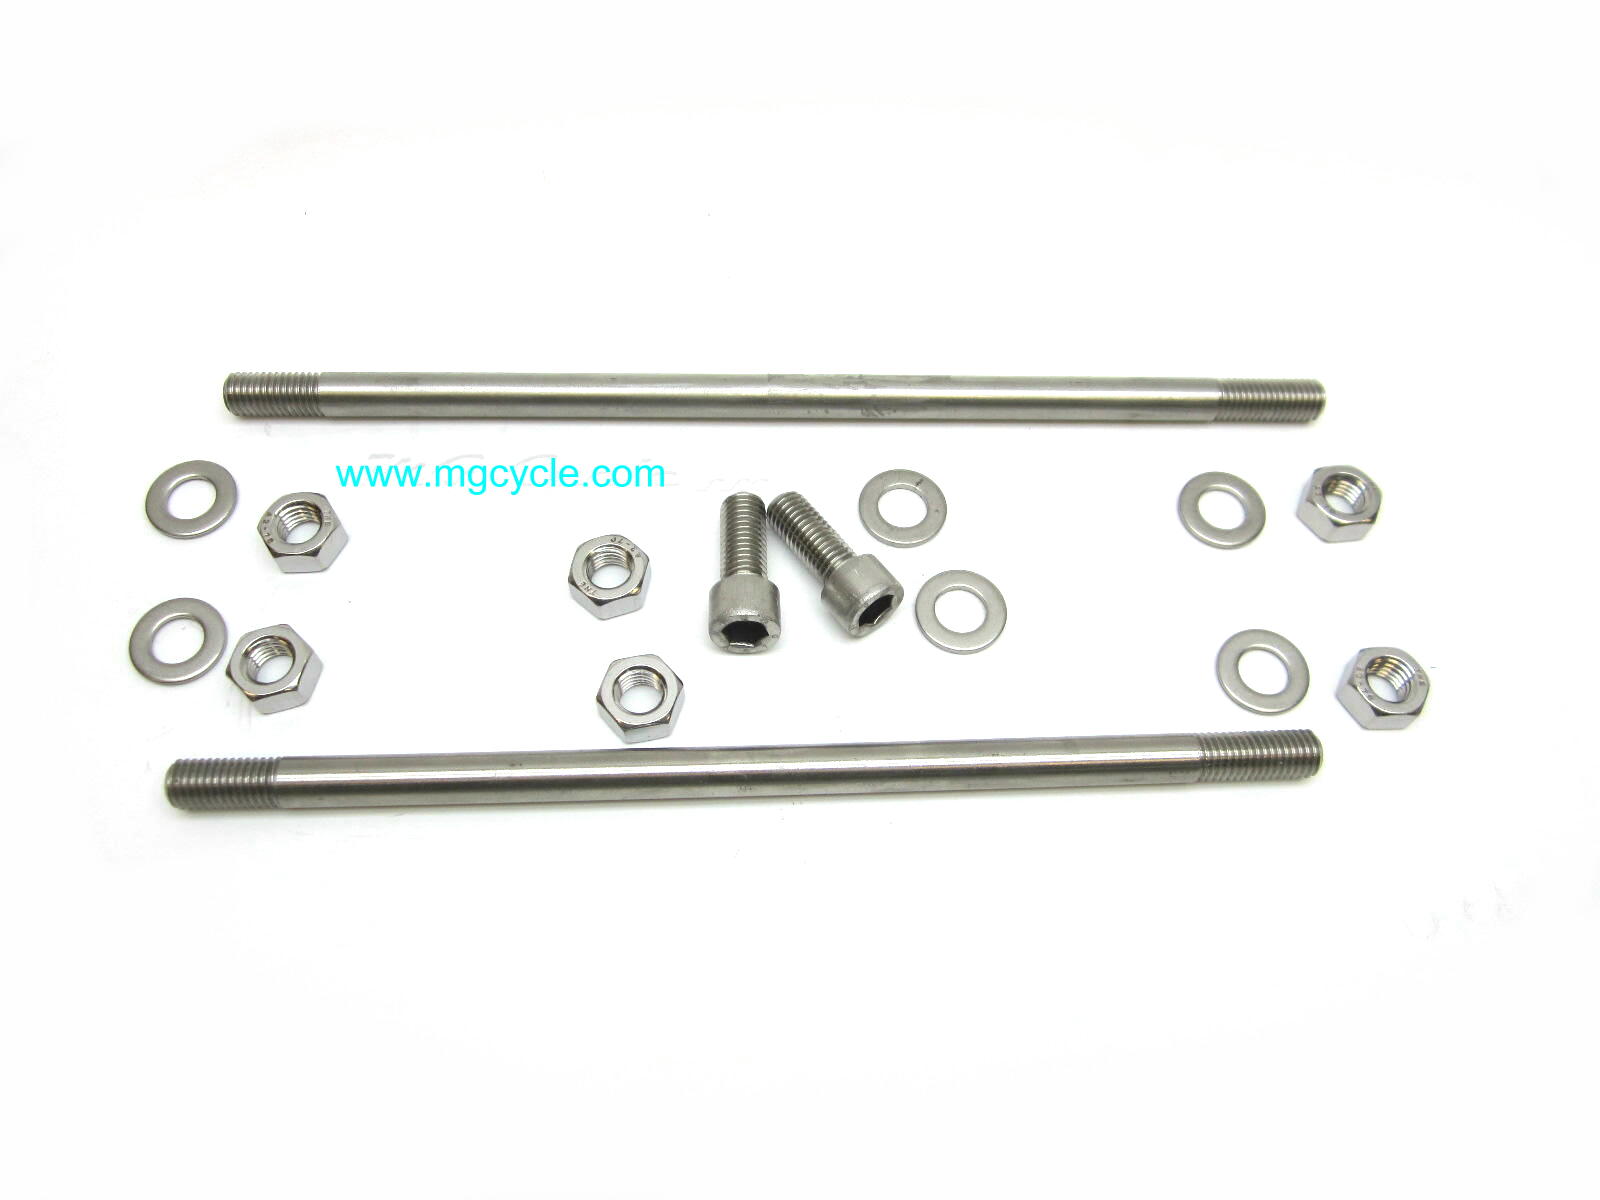 Stainless steel engine mounting kit